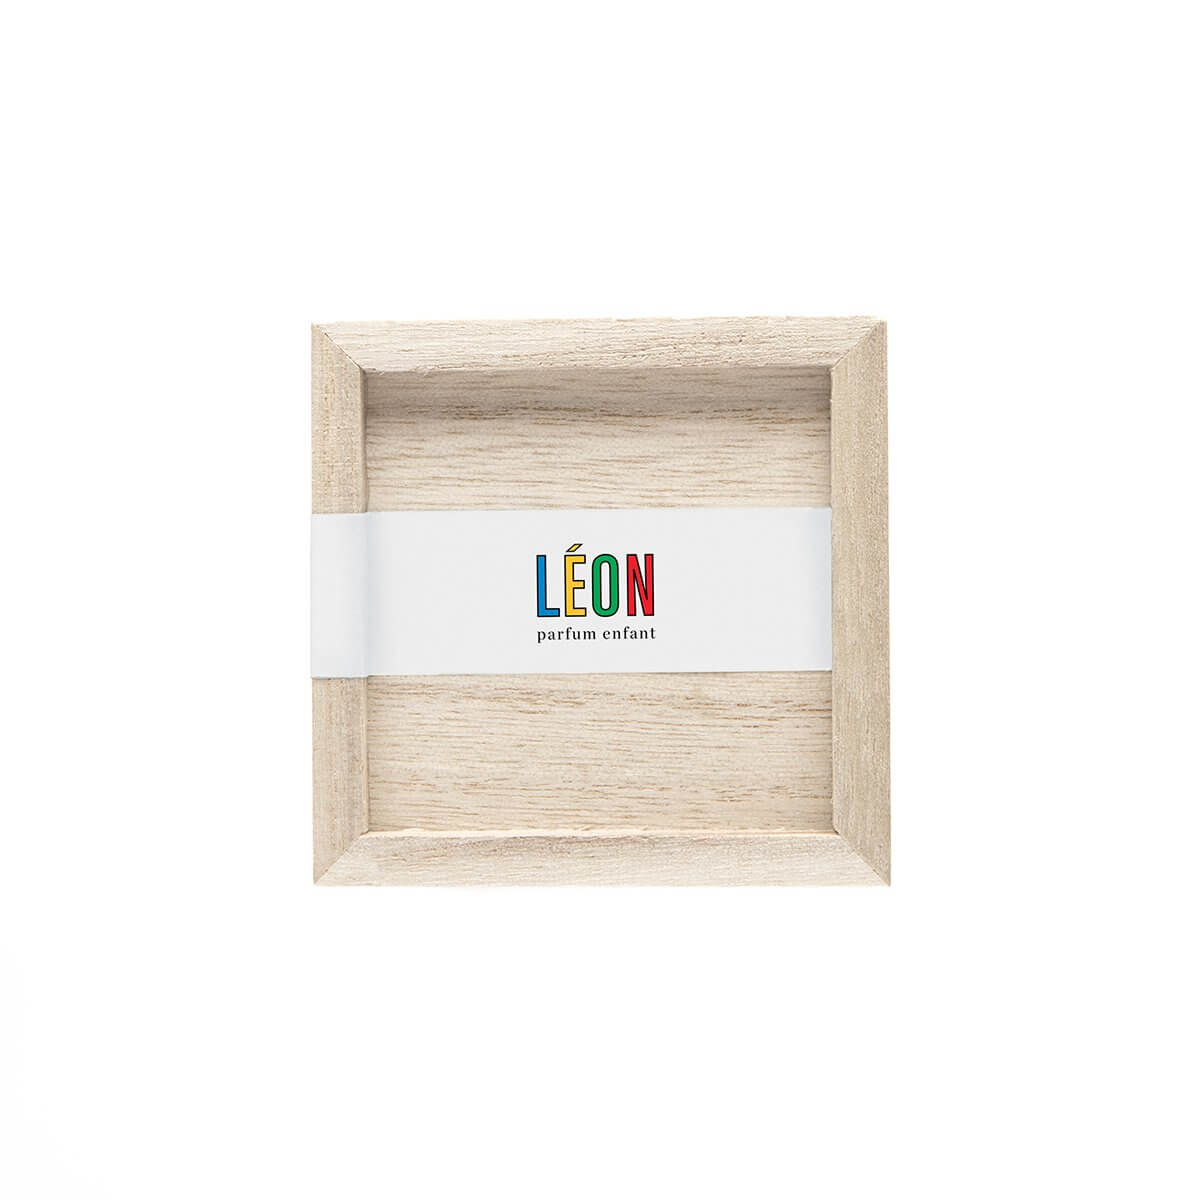 Leon by Marie Jeanne at Indigo 